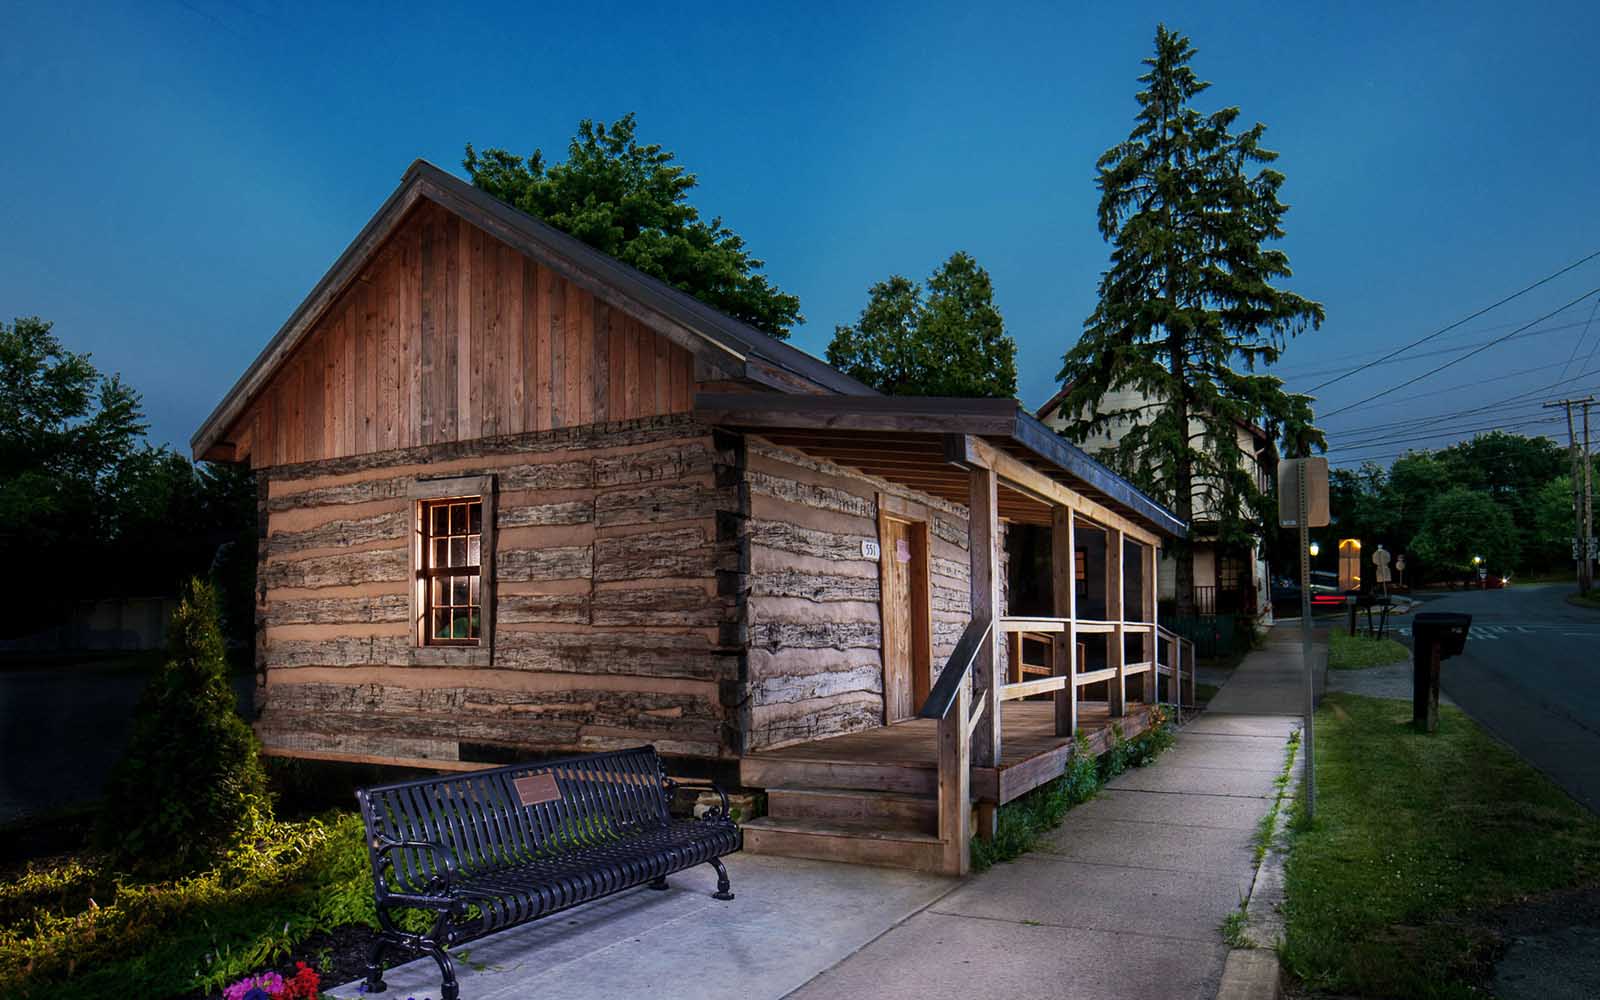 A log cabin with a sidewalk in front and a large pine tree to the side.